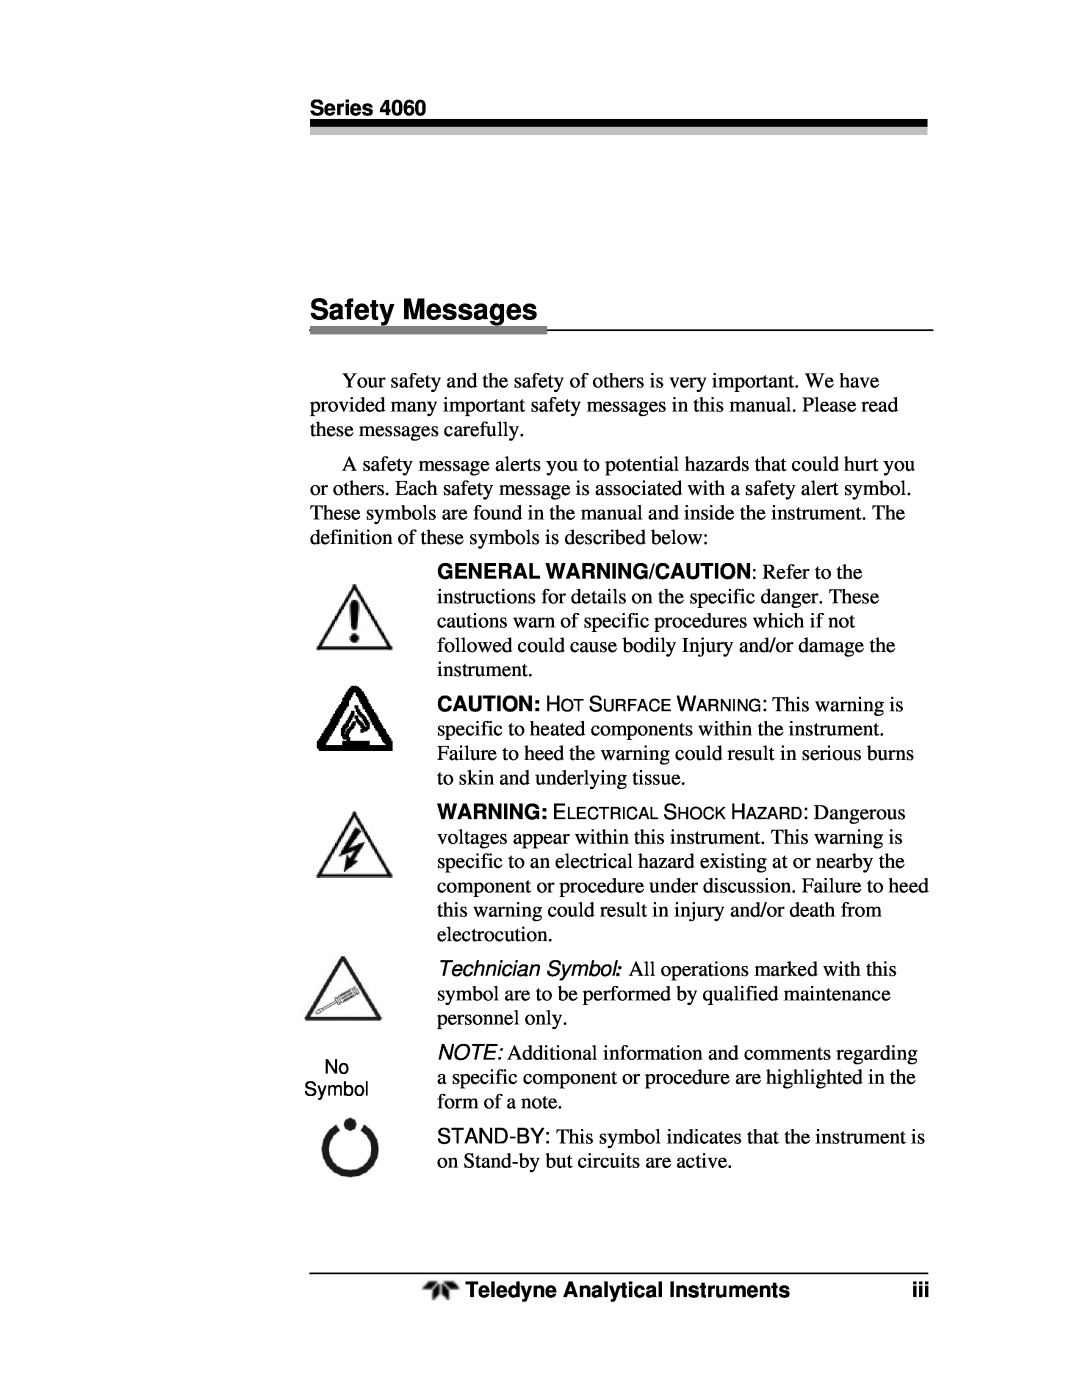 Teledyne 4060 manual Safety Messages, No Symbol 